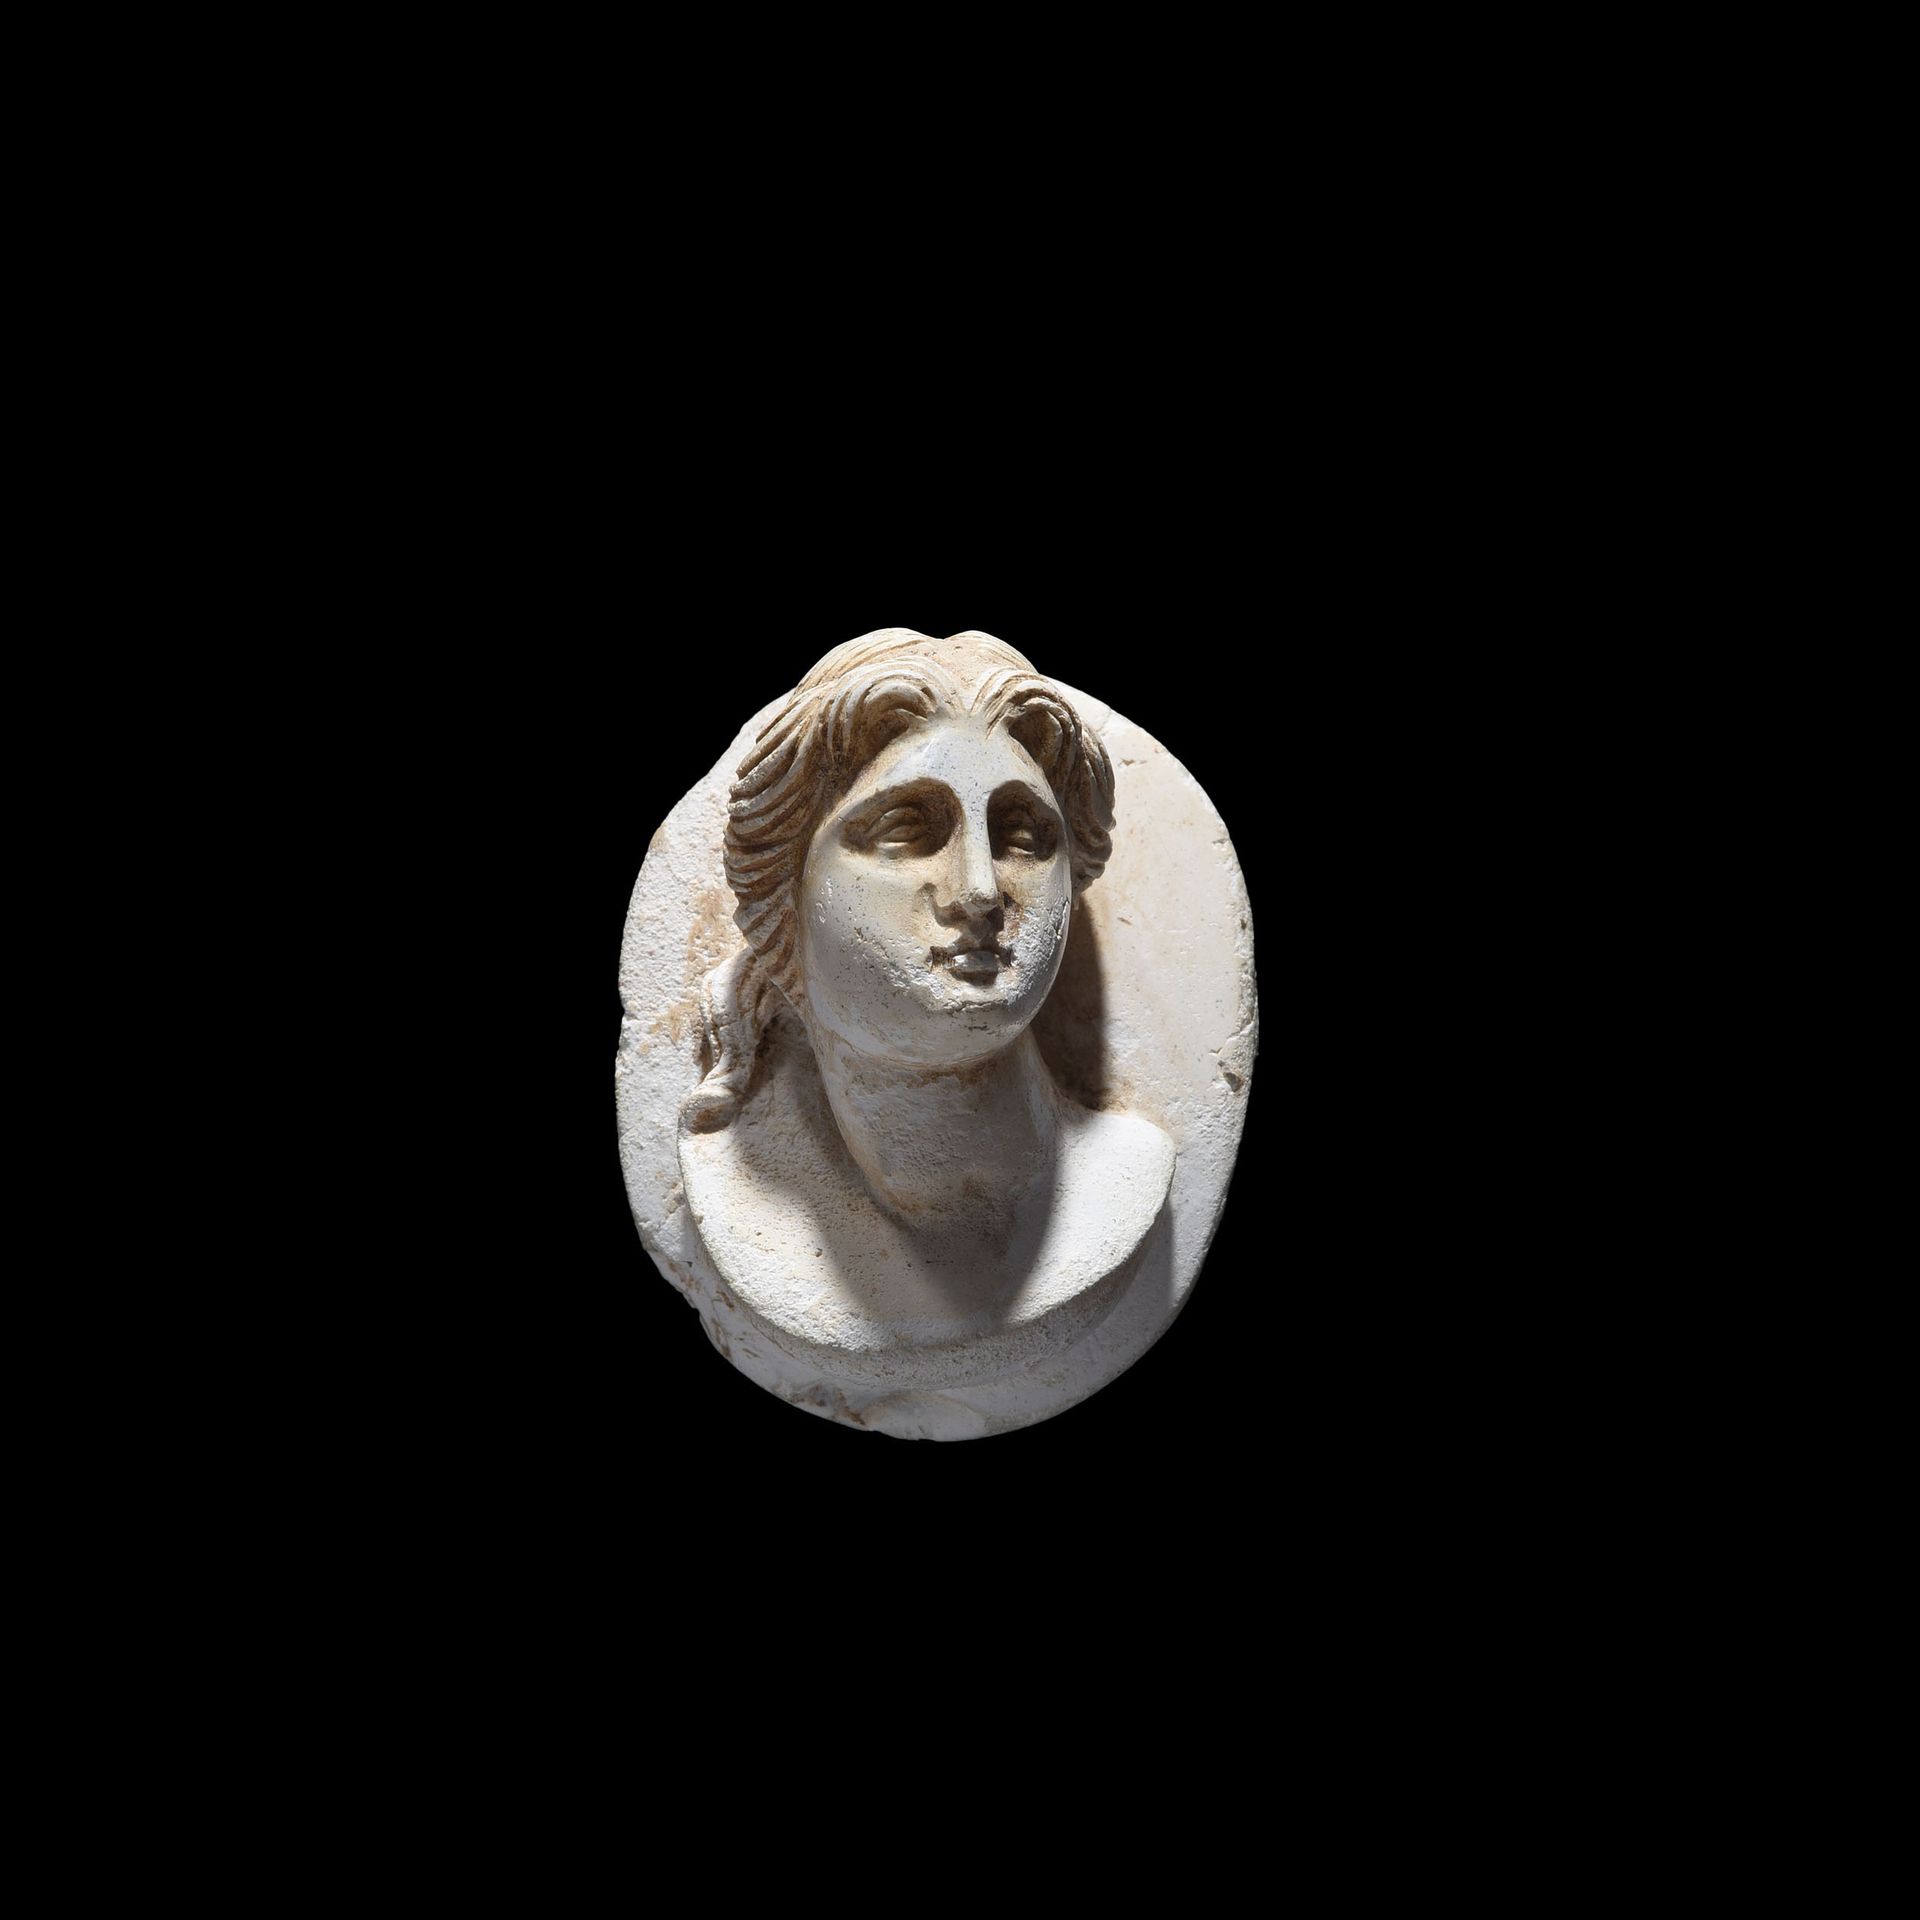 Null CAMEO WITH A FEMALE BUST

Hellenistic art, 1st century BC

A calcified ston&hellip;